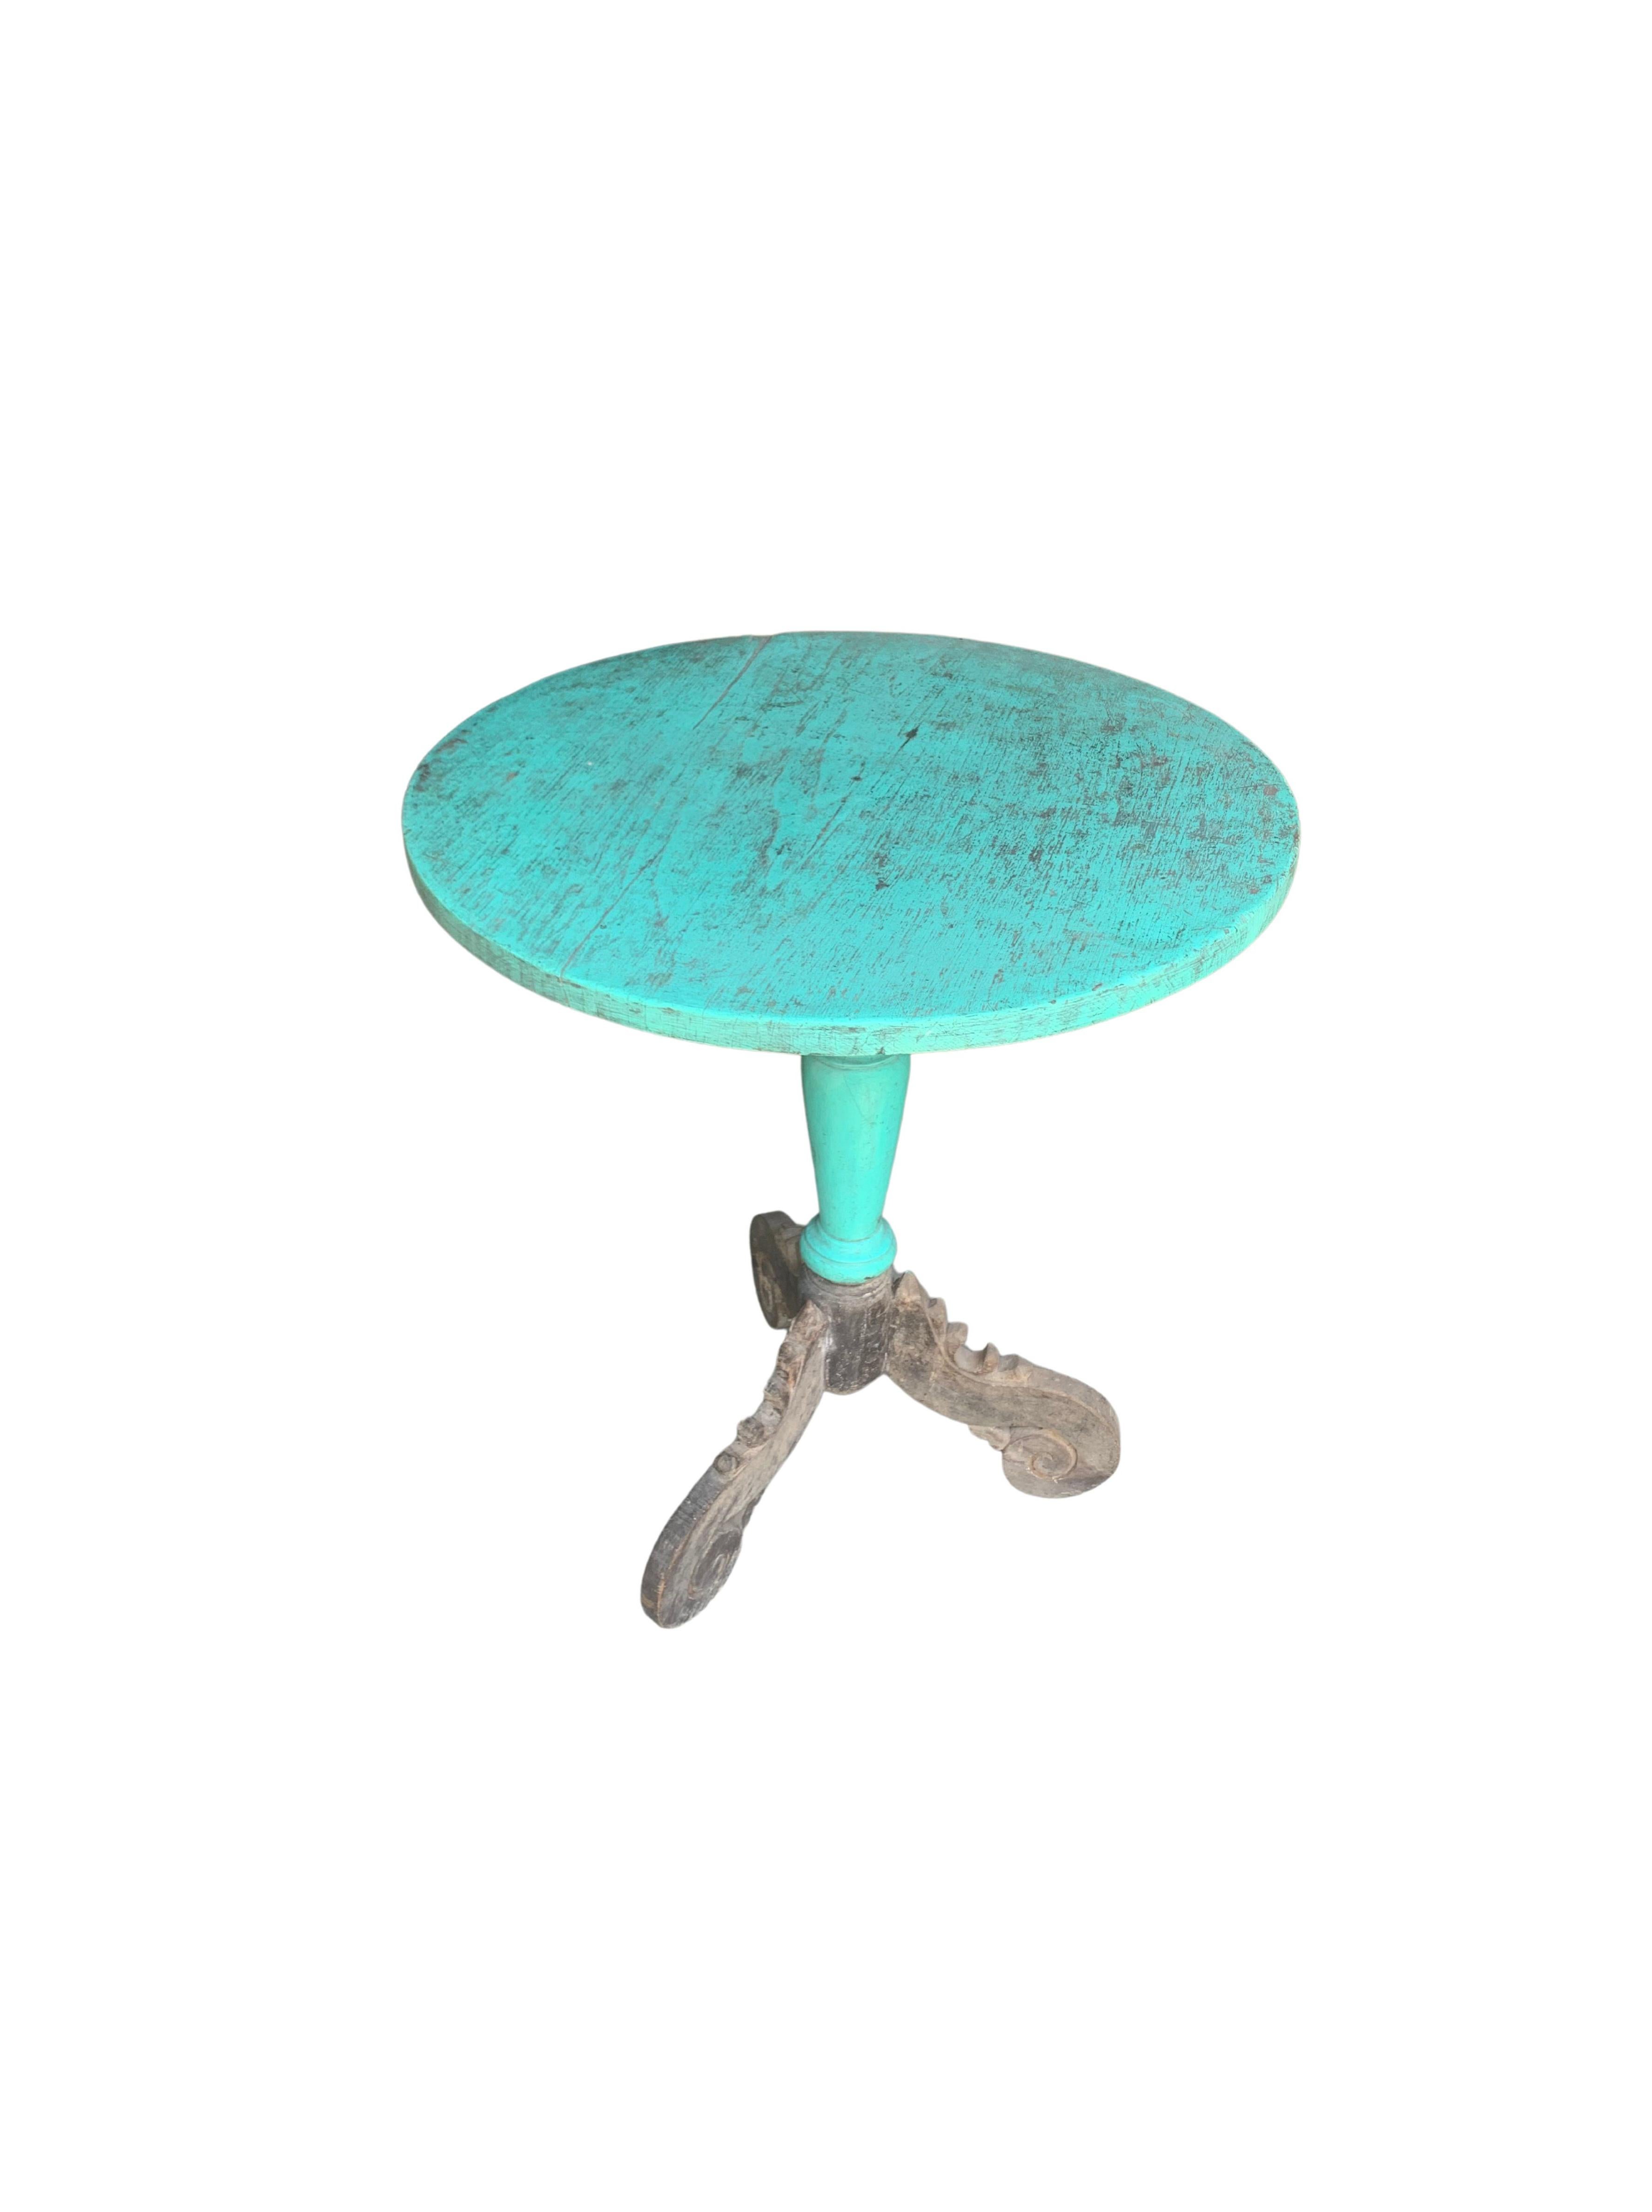 This teak round table was crafted on the island of Madura off the Northeastern coast of Java, Indonesia. It features hand-carved legs with floral detailing as well as a wonderful turquoise polychrome finish. A wonderful addition to any space. The